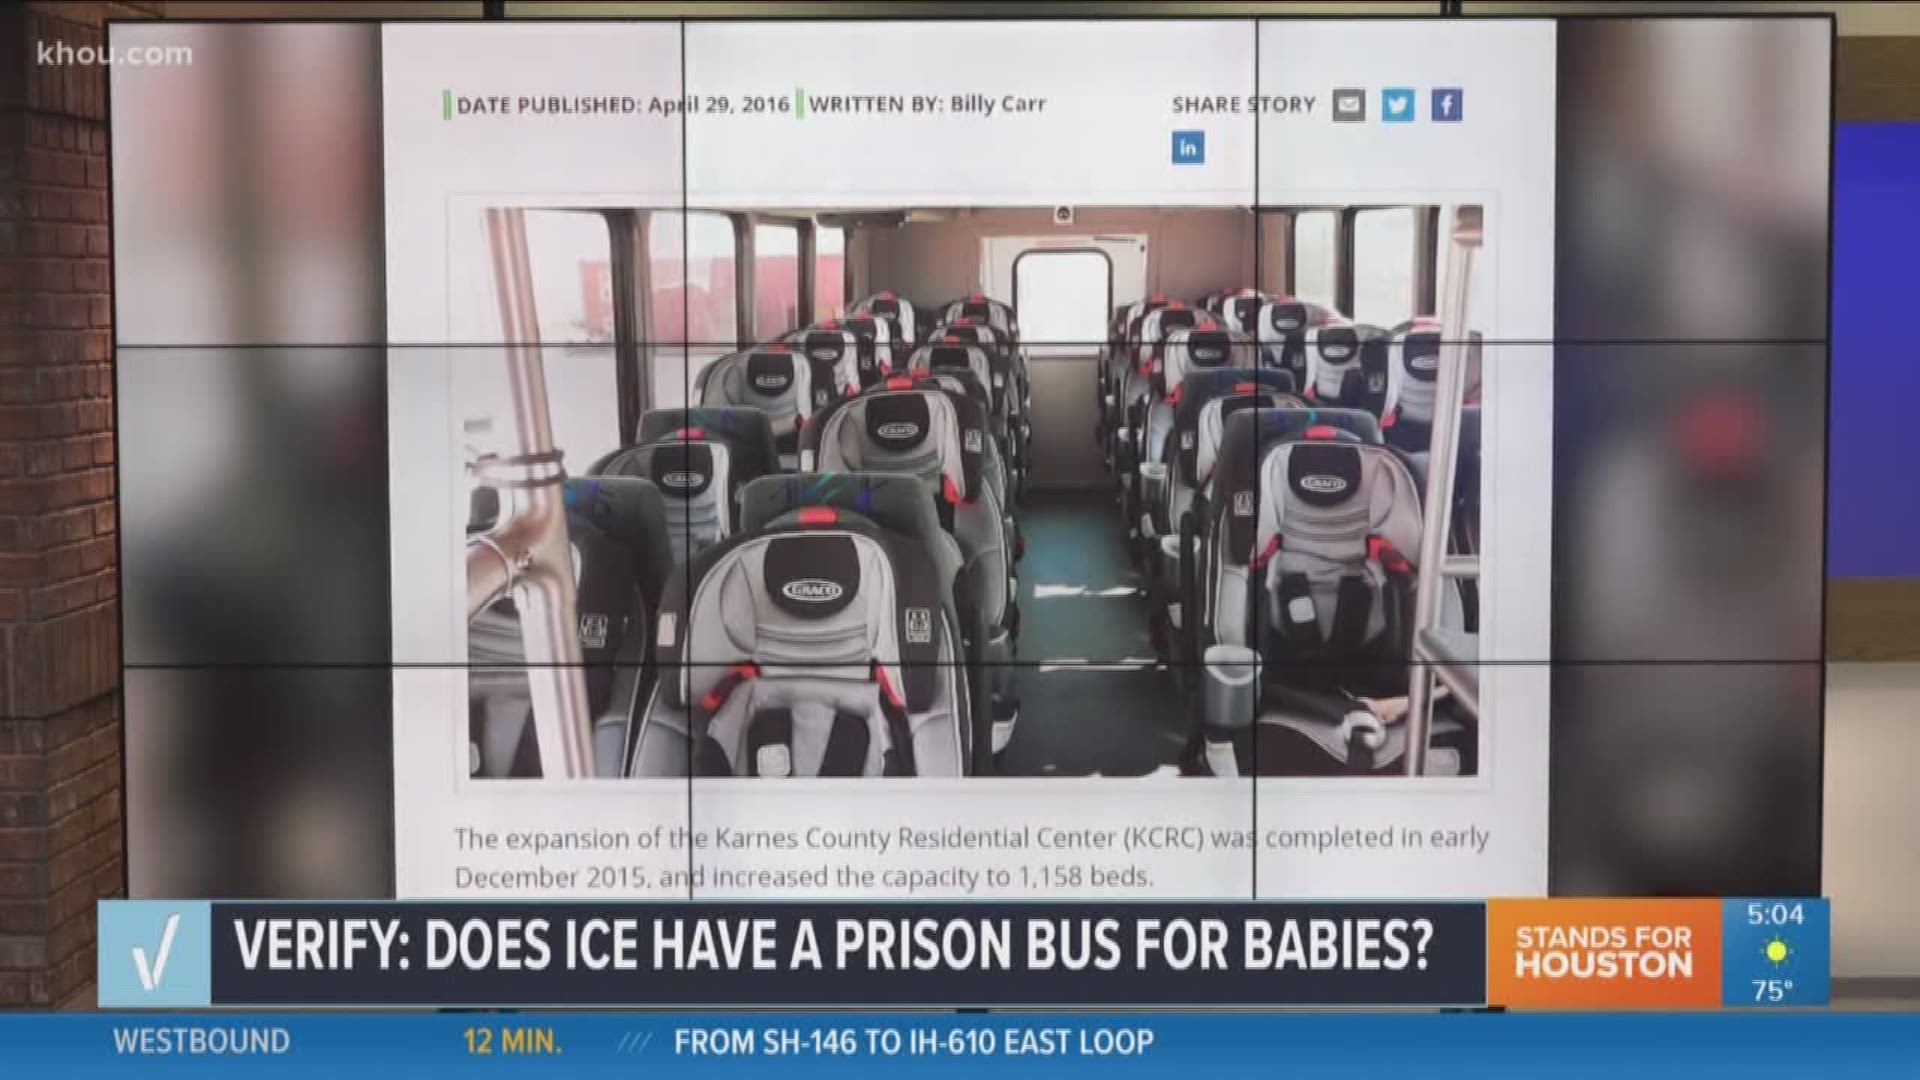 VERIFY: Is there a prison bus for children?